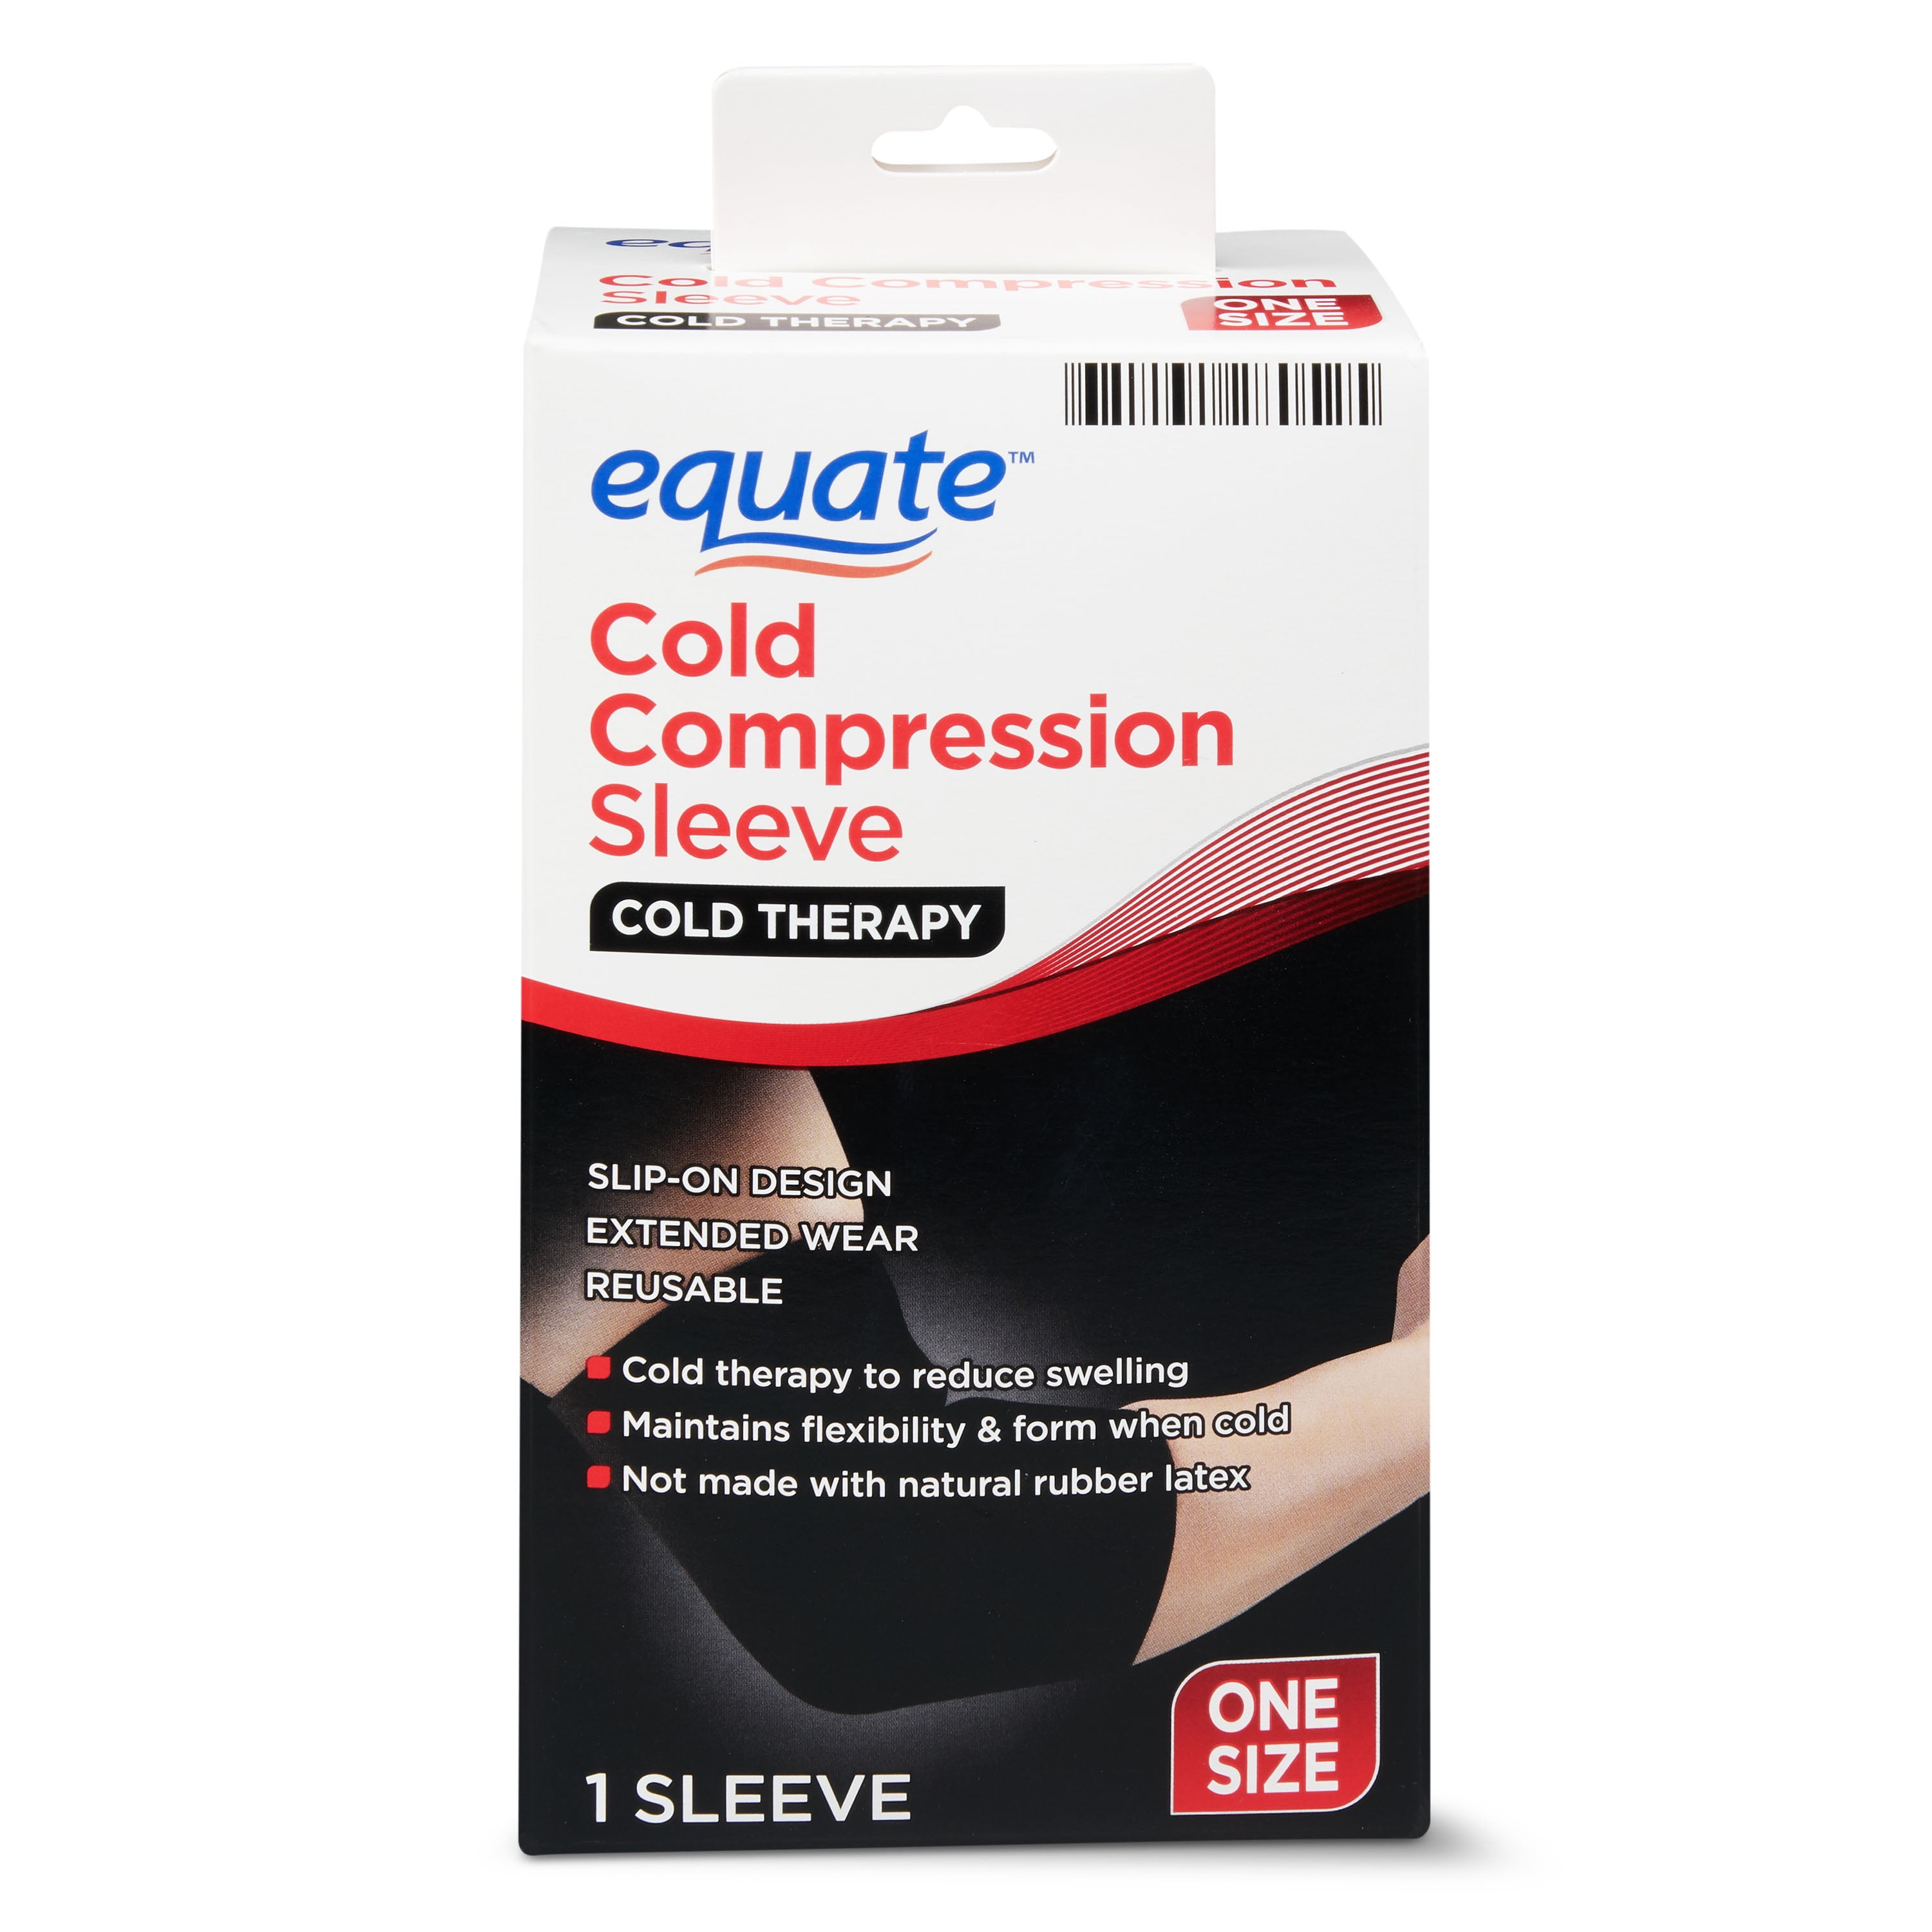 Equate Cold Compression Sleeve 